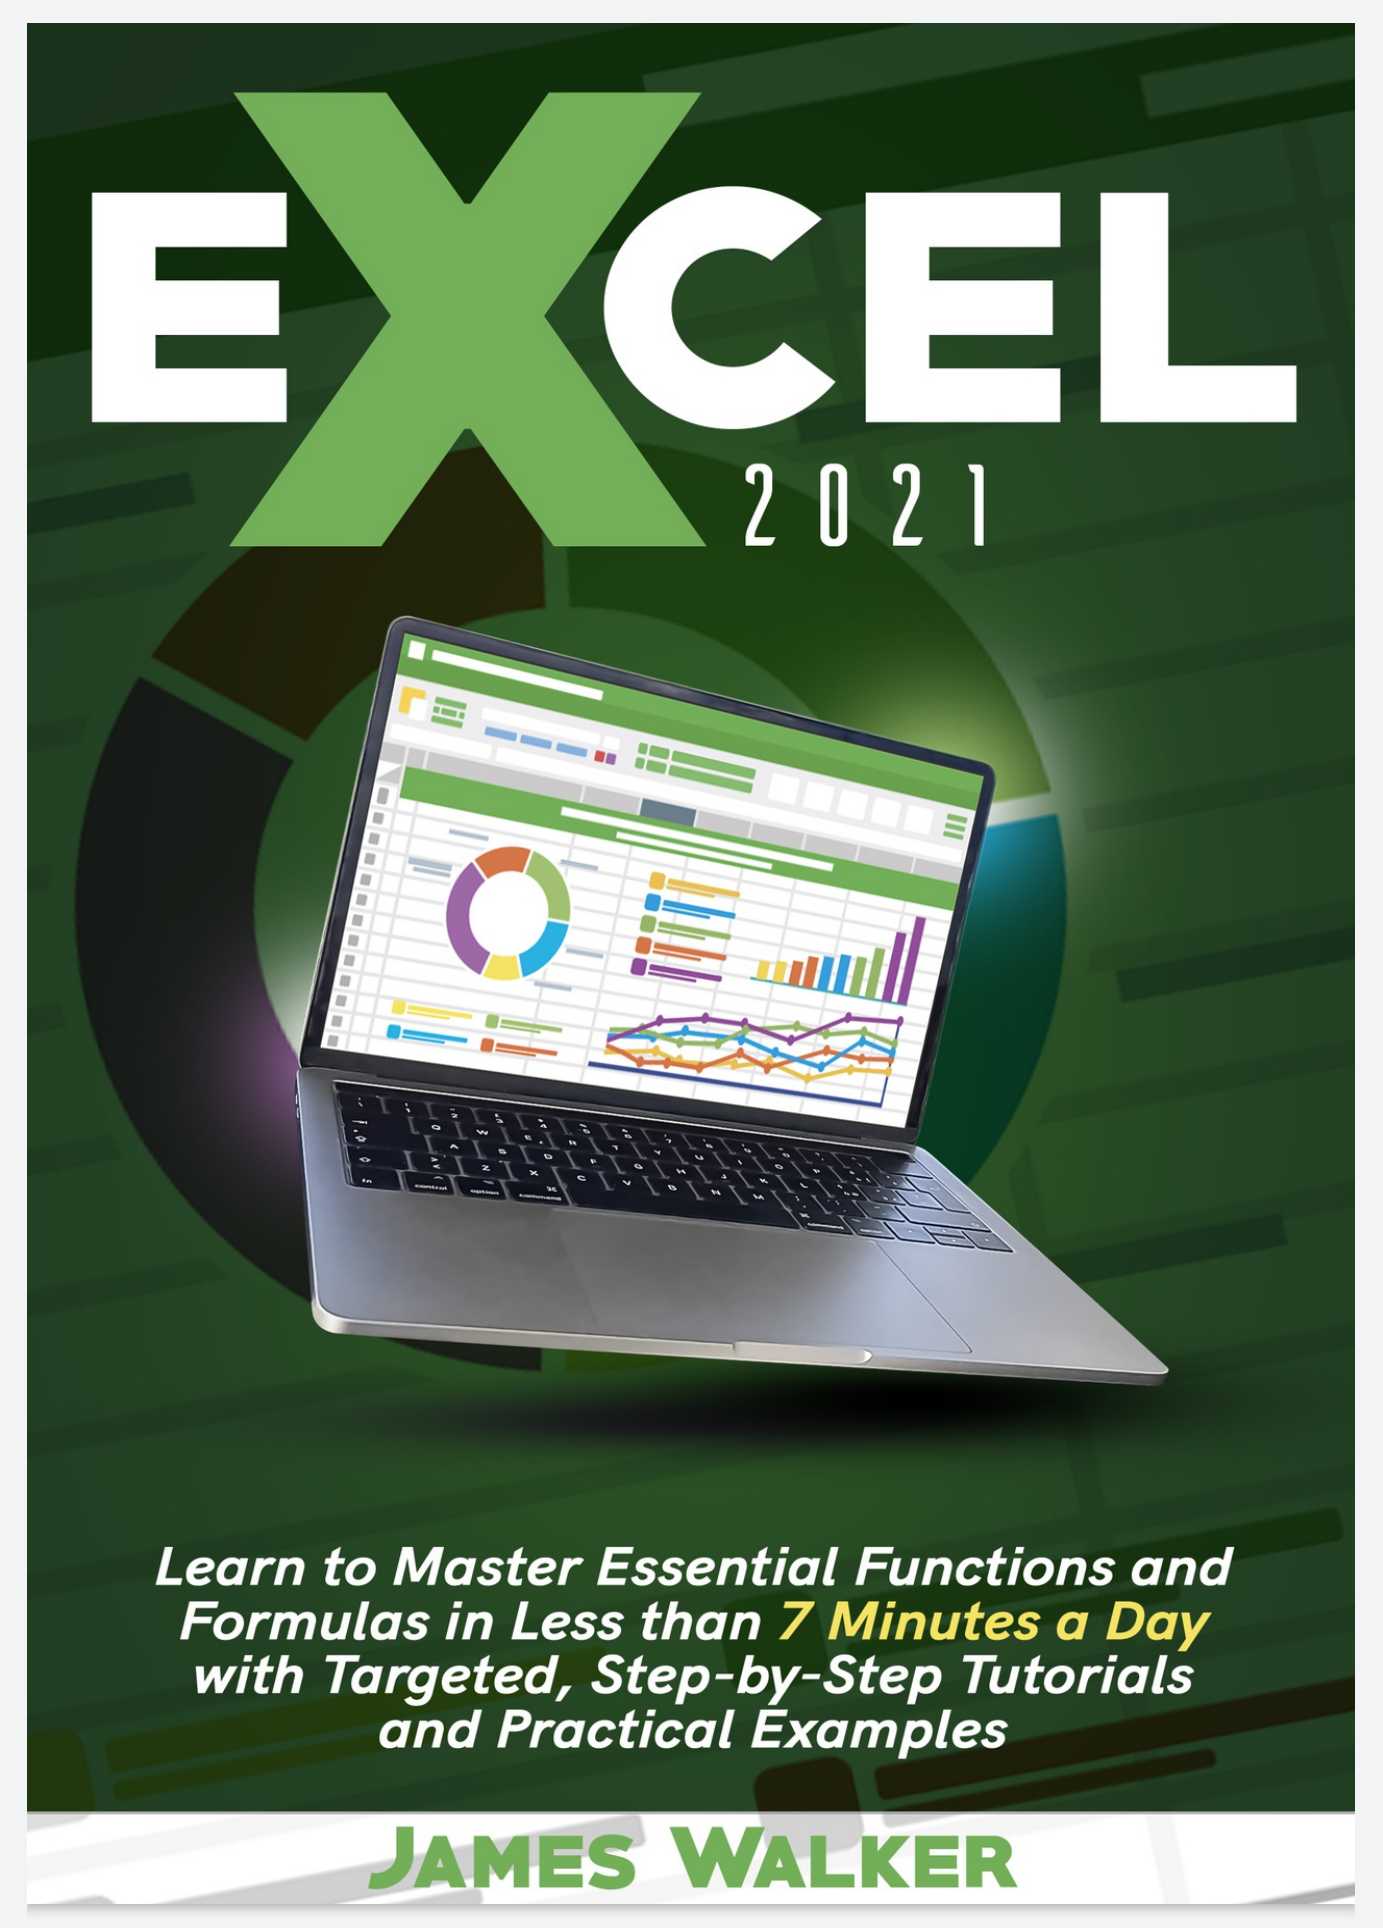 Excel 2021: Learn to Master Essential Functions and Formulas in Less than 7 Minutes a Day with Targeted, Step-by-Step Tutorials and Practical Examples